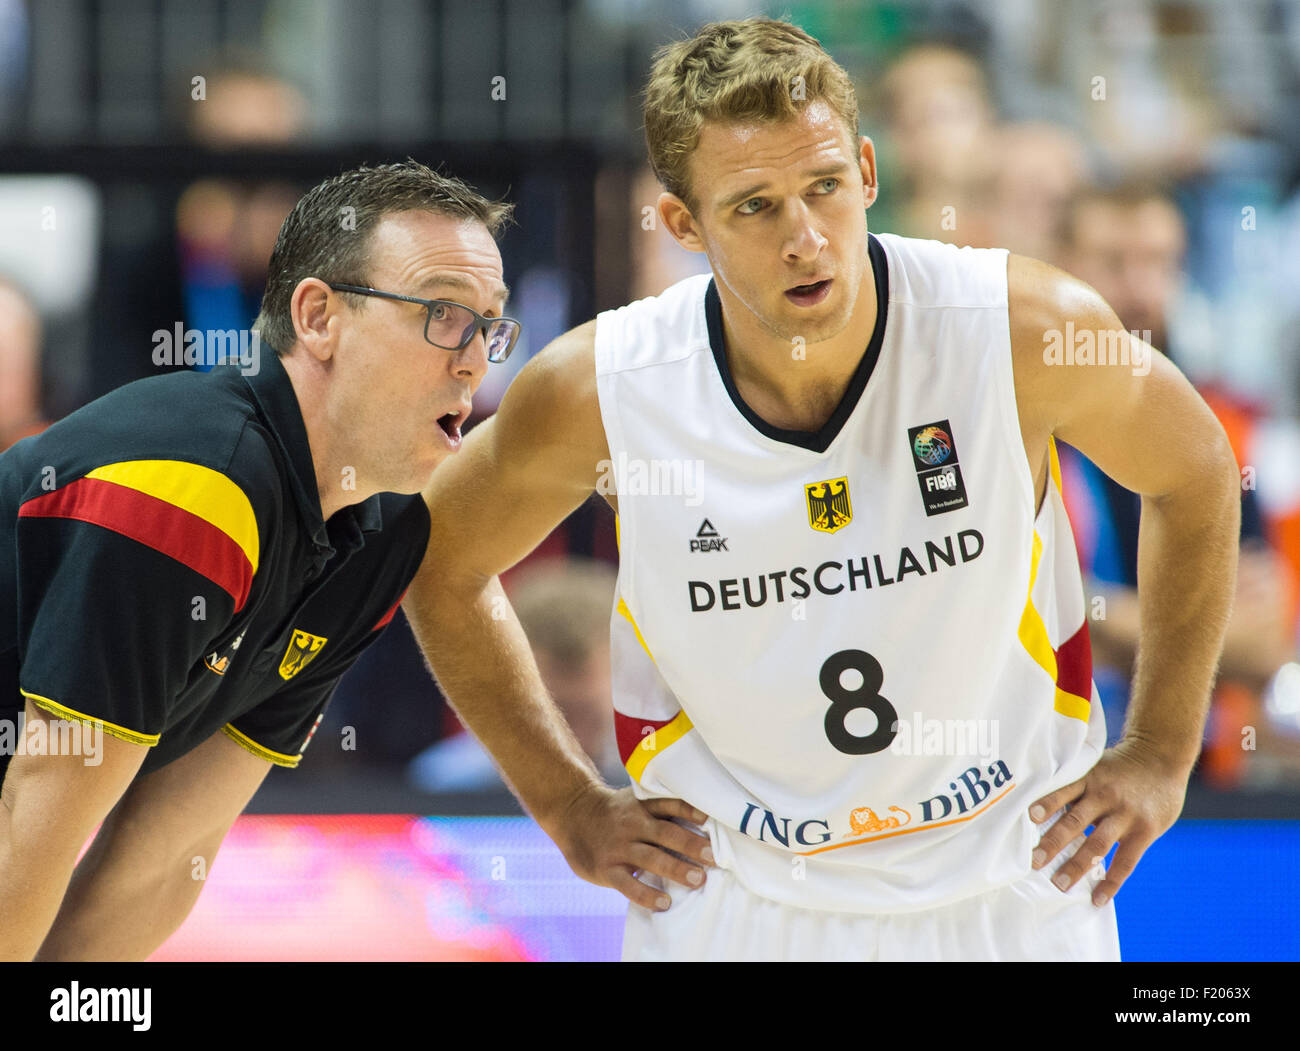 Berlin, Germany. 08th Sep, 2015. Germany's coach Chris Fleming (l) talks to his player Heiko Schaffartzik (r) during the FIBA EuroBasket 2015 Group B match between Germany and Turkey, at the Mercedes-Benz-Arena in Berlin, Germany, 08 September 2015. Germany lost 75:80. Photo: Lukas Schulze/dpa/Alamy Live News Stock Photo